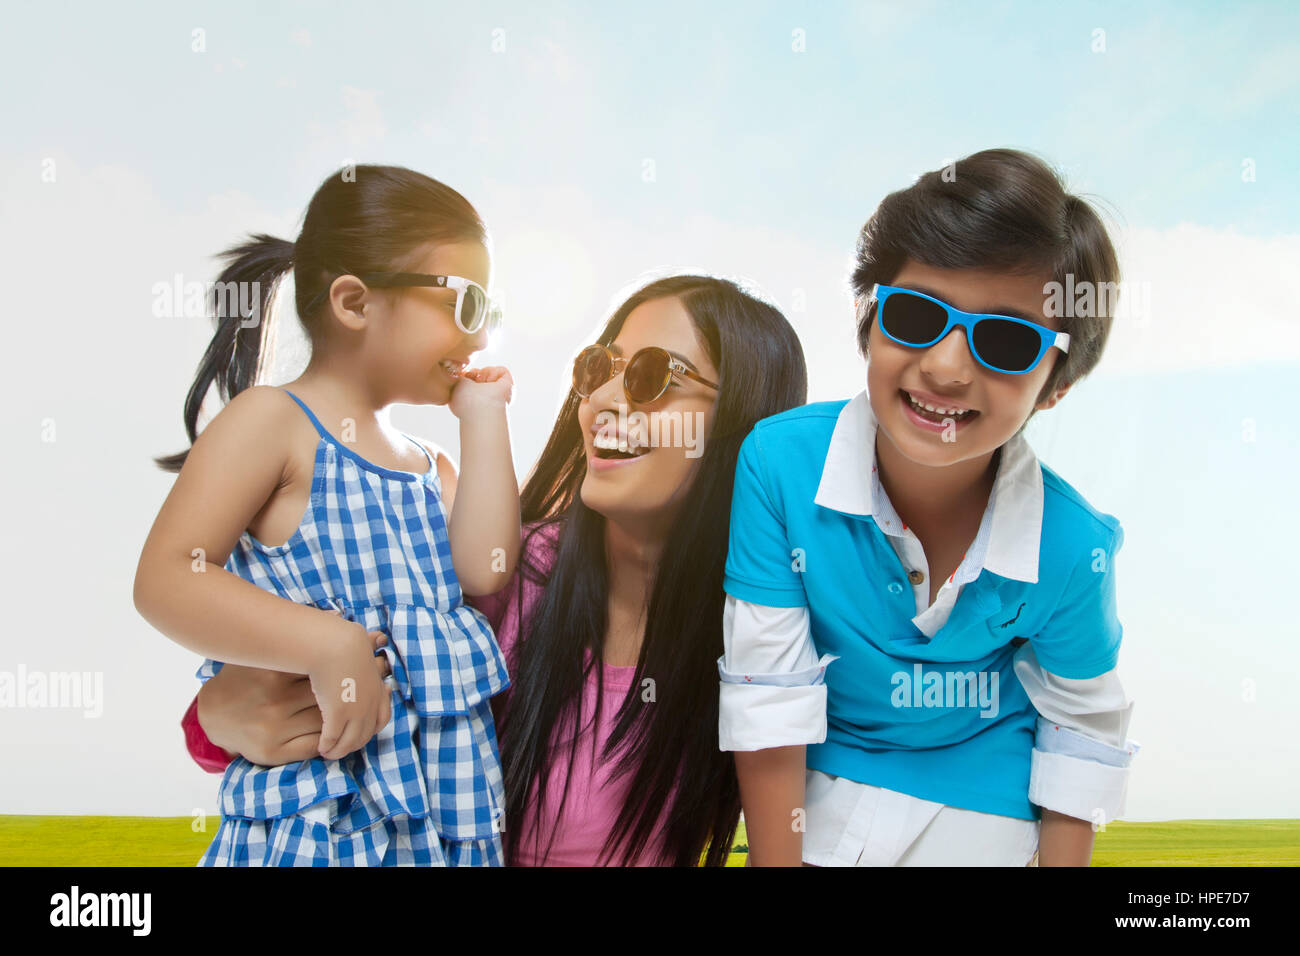 Smiling family wearing sunglasses having fun in a park on sunny day Stock Photo